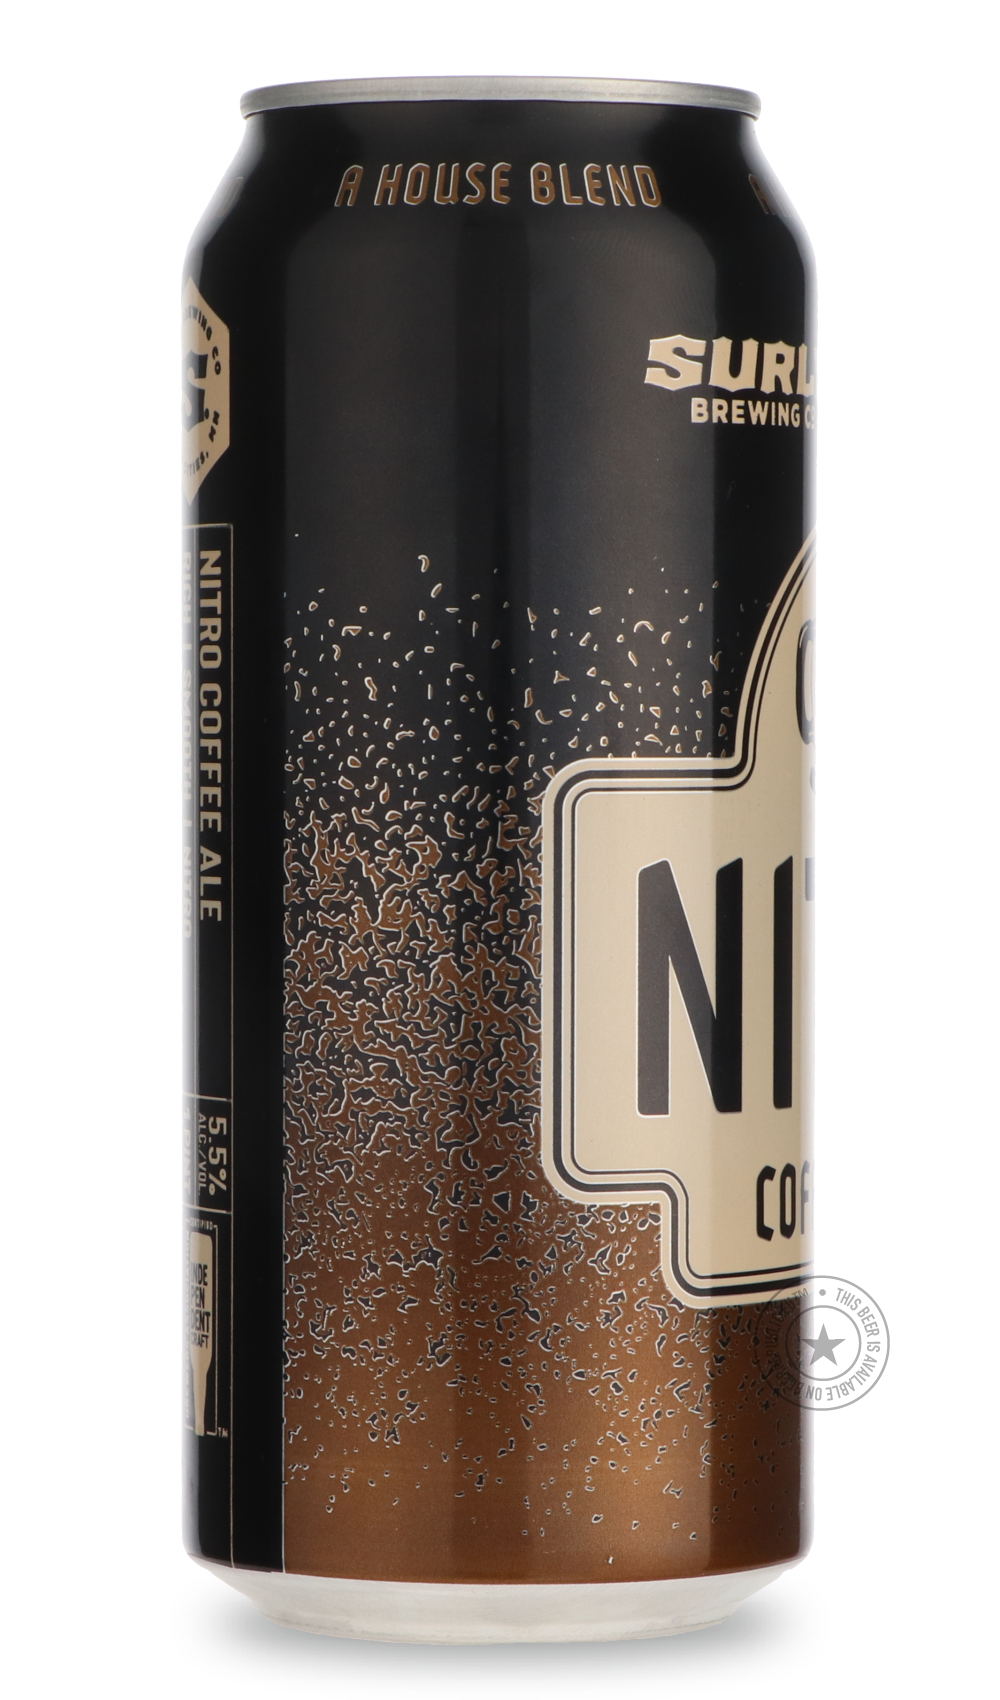 -Surly- Nitro Coffee Ale-Stout & Porter- Only @ Beer Republic - The best online beer store for American & Canadian craft beer - Buy beer online from the USA and Canada - Bier online kopen - Amerikaans bier kopen - Craft beer store - Craft beer kopen - Amerikanisch bier kaufen - Bier online kaufen - Acheter biere online - IPA - Stout - Porter - New England IPA - Hazy IPA - Imperial Stout - Barrel Aged - Barrel Aged Imperial Stout - Brown - Dark beer - Blond - Blonde - Pilsner - Lager - Wheat - Weizen - Amber